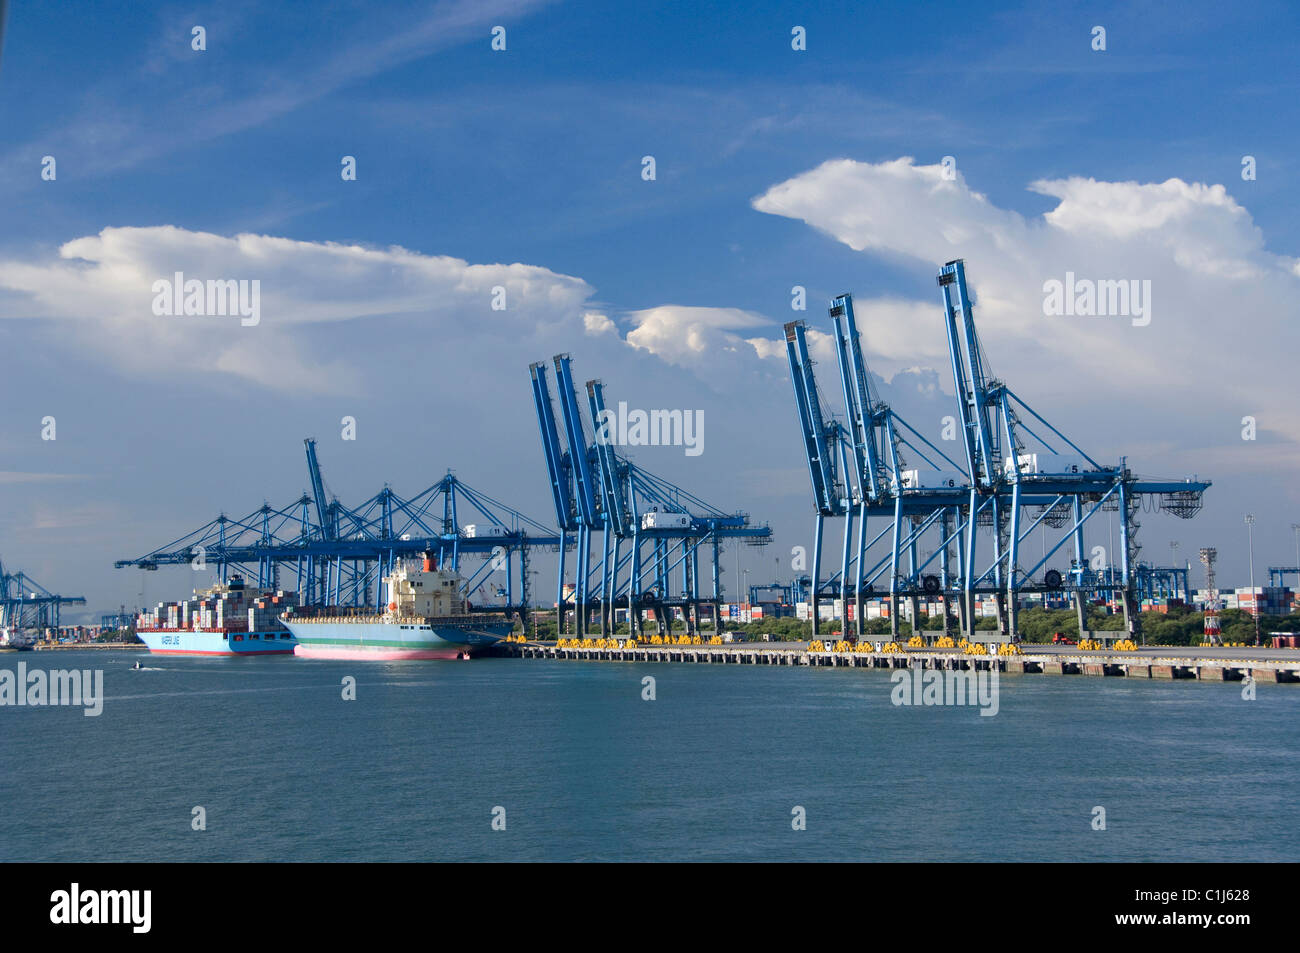 Malaysia, State of Selangor, Port Klang. One of the major shipping port